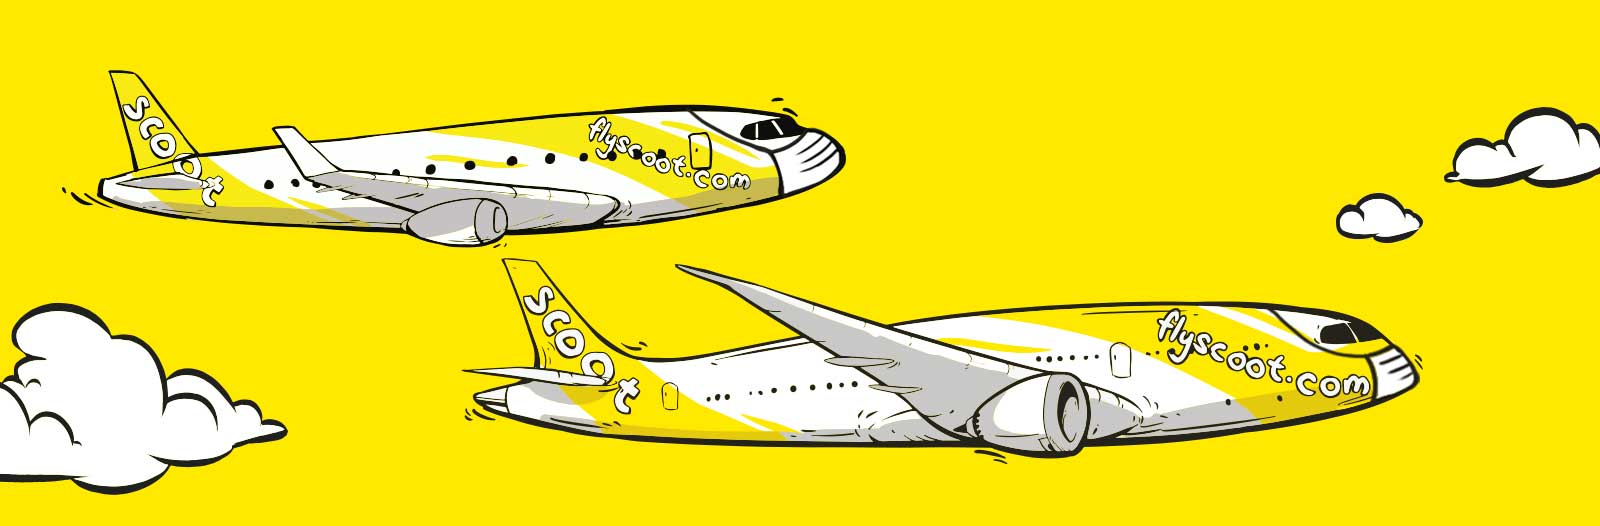 Airlines scoot Scoot Airlines